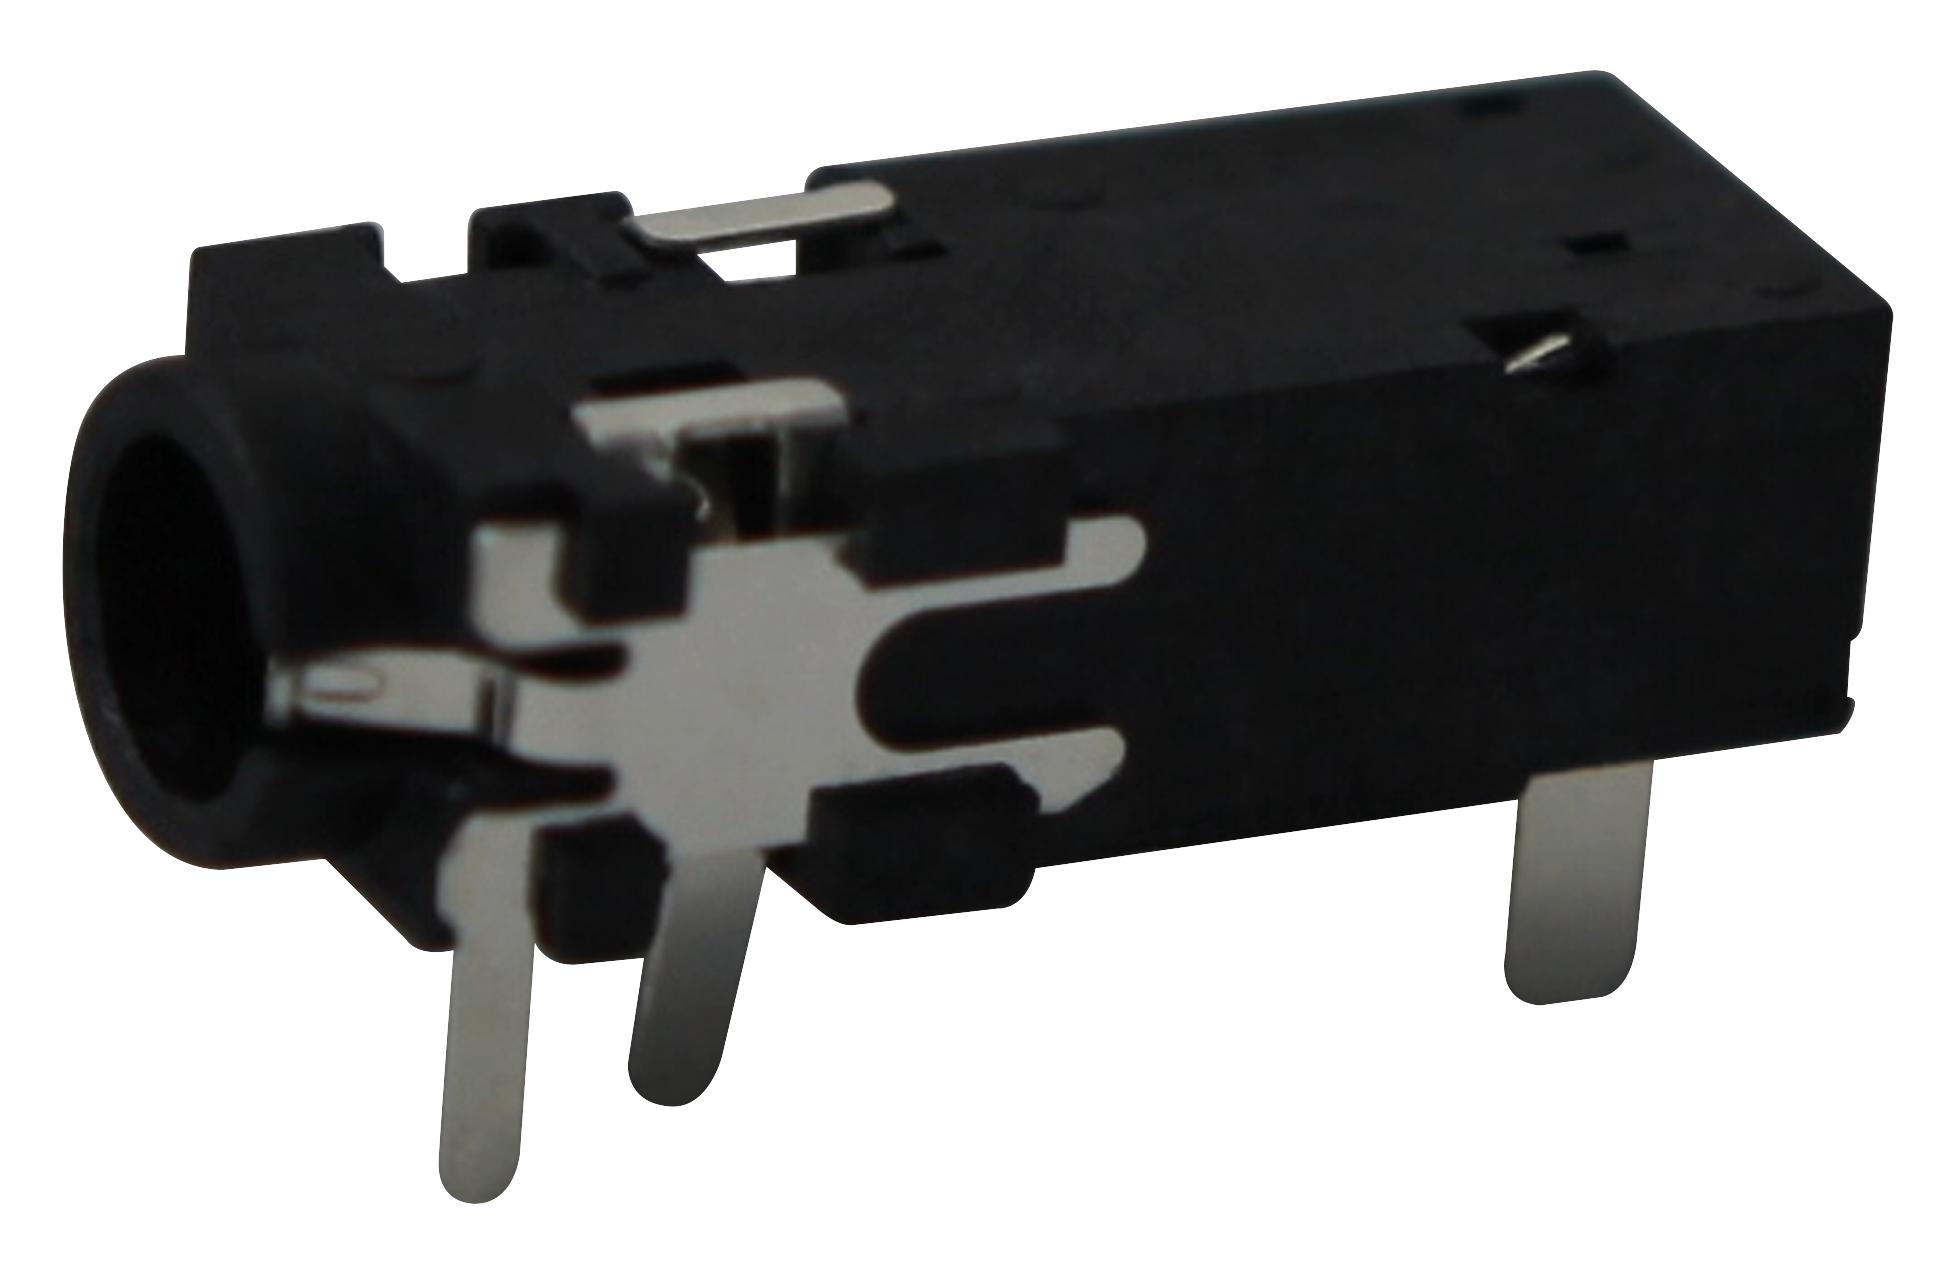 FC68126 CONNECTOR, PHONO, 3.5MM, JACK, 4POLE CLIFF ELECTRONIC COMPONENTS